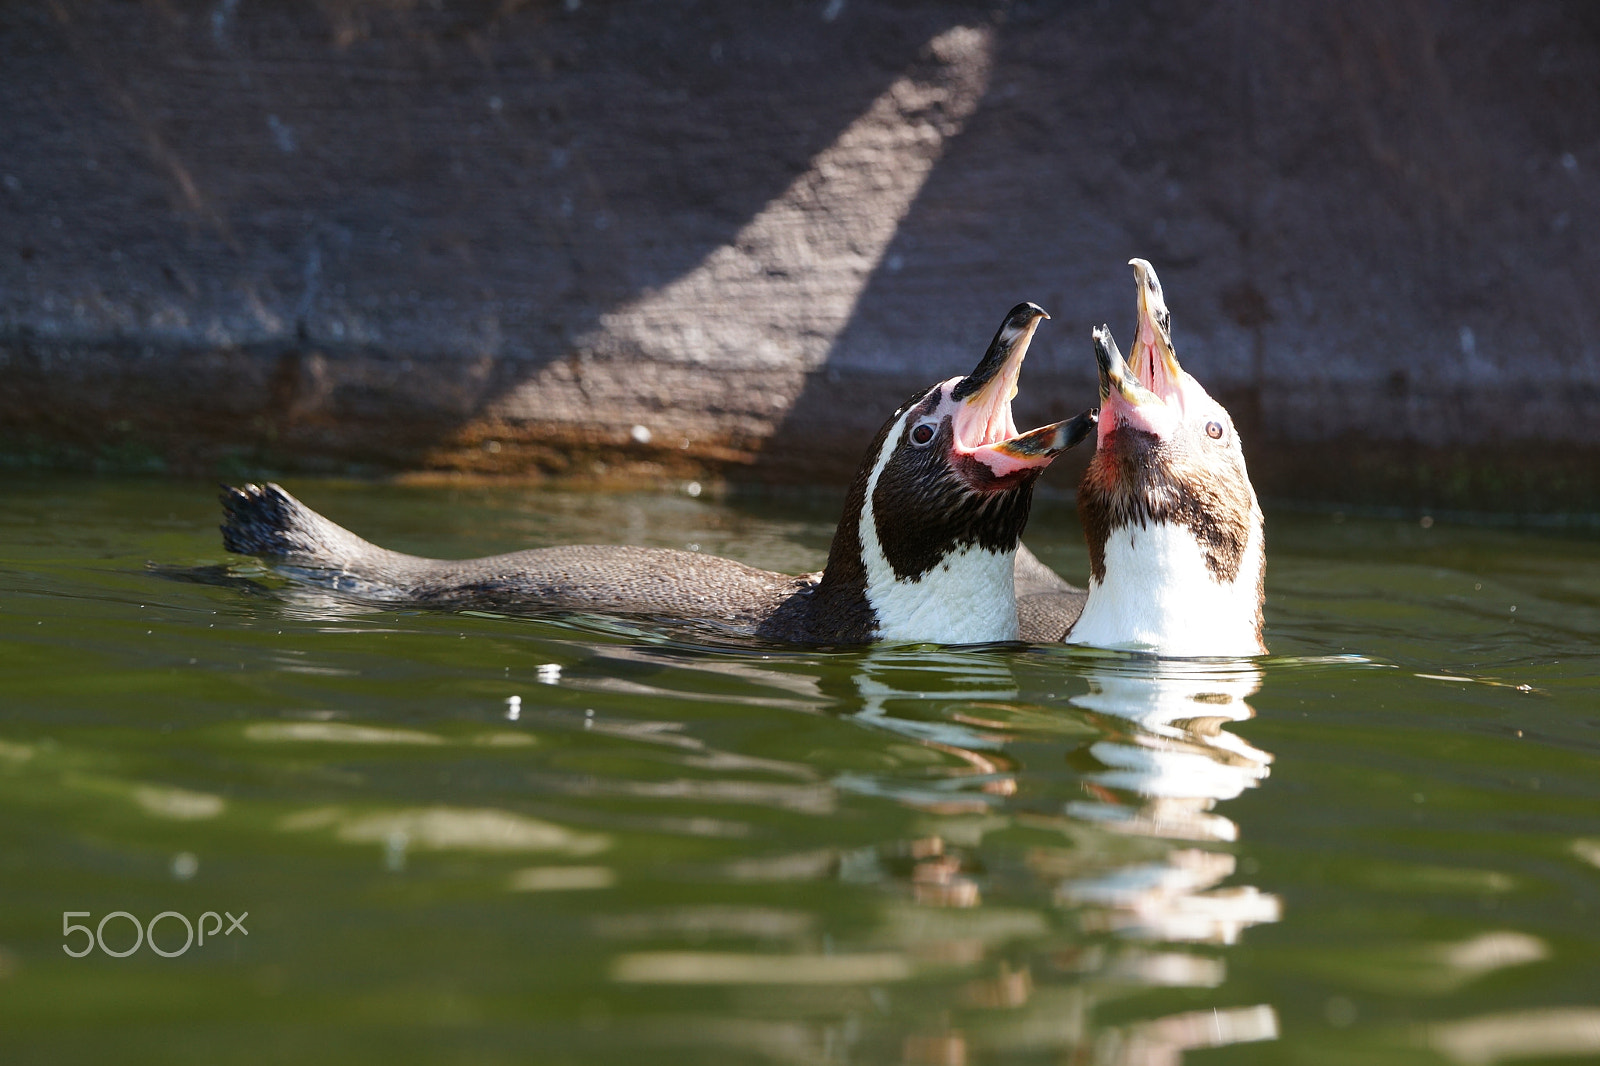 Sony a99 II sample photo. Penguins in the water photography